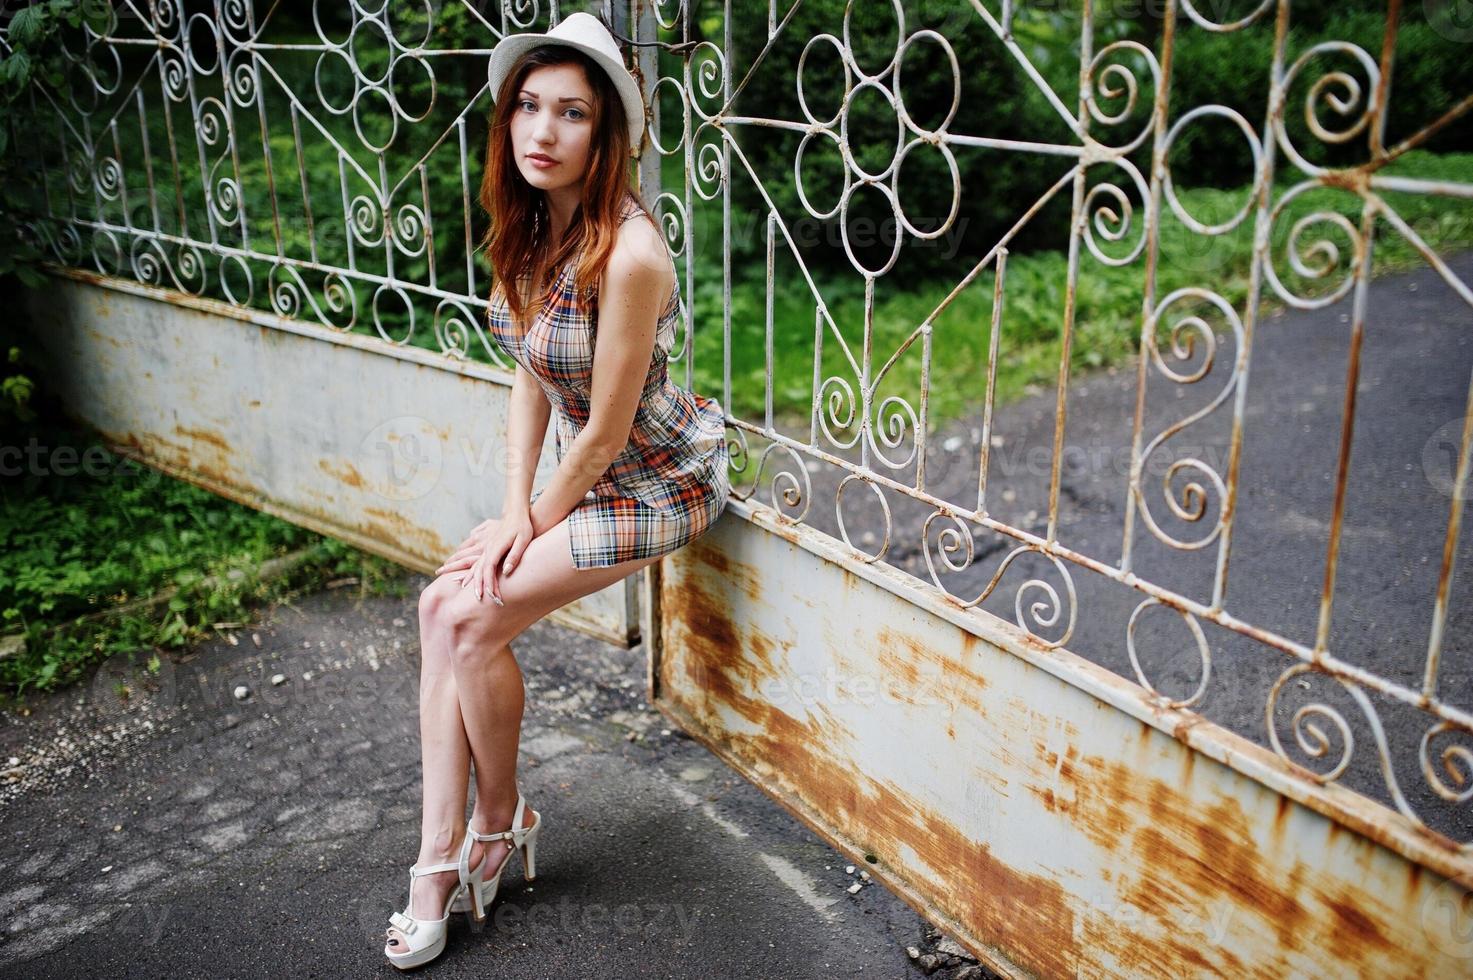 Amazing long legs with hig heels girl wear on hat against iron fence. photo